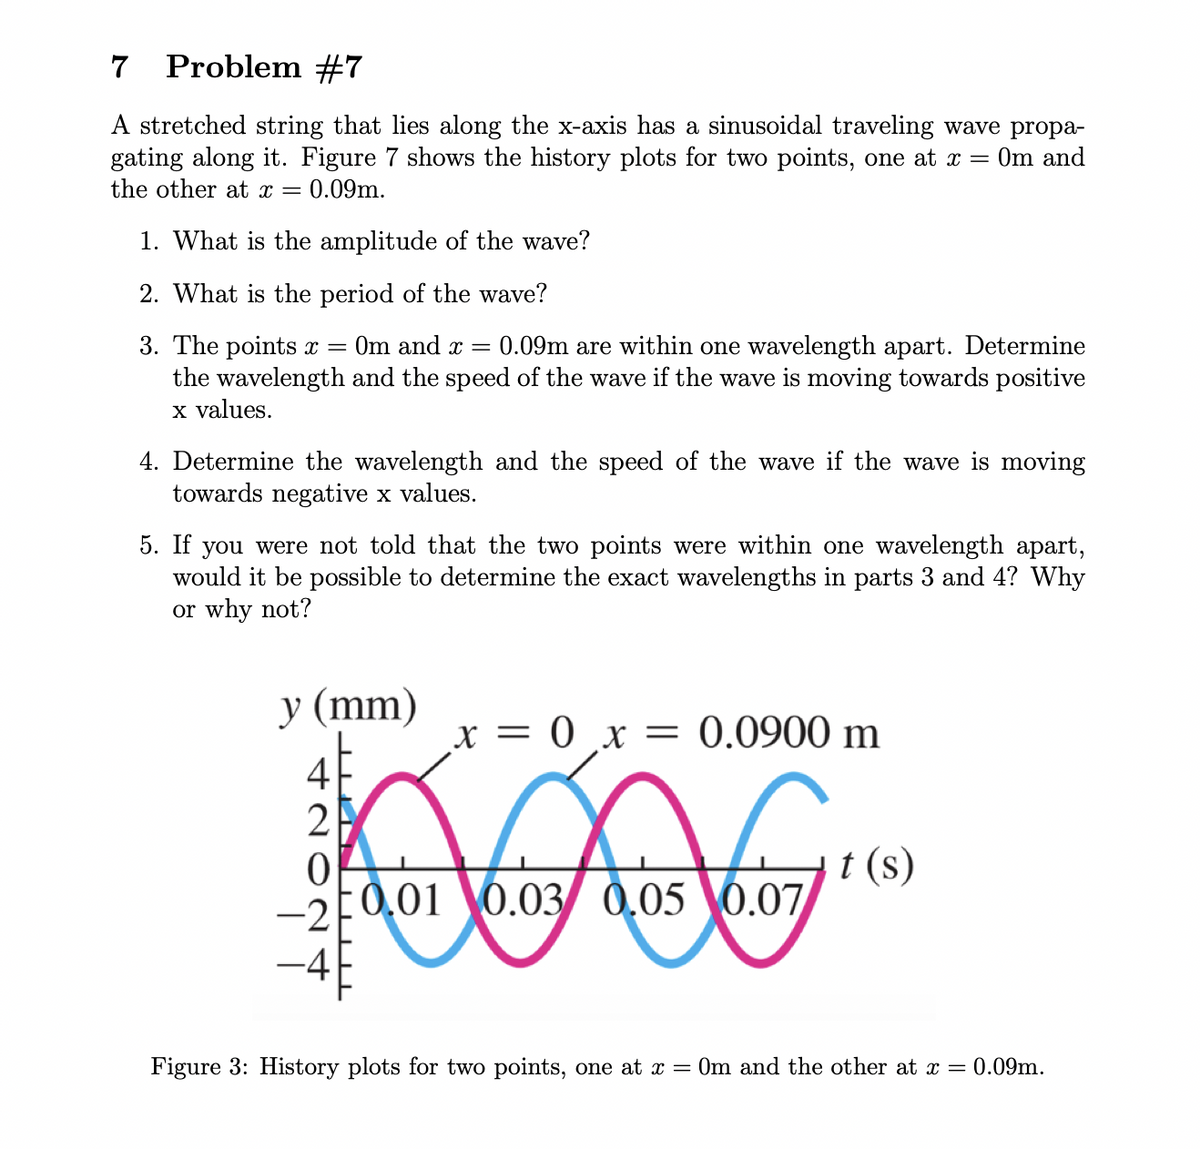 7 Problem #7
A stretched string that lies along the x-axis has a sinusoidal traveling wave propa-
gating along it. Figure 7 shows the history plots for two points, one at x = 0m and
the other at x
0.09m.
1. What is the amplitude of the wave?
2. What is the period of the wave?
3. The points x = 0m and x =
the wavelength and the speed of the wave if the wave is moving towards positive
x values.
0.09m are within one wavelength apart. Determine
4. Determine the wavelength and the speed of the wave if the wave is moving
towards negative x values.
5. If you were not told that the two points were within one wavelength apart,
would it be possible to determine the exact wavelengths in parts 3 and 4? Why
or why not?
y (mm)
x = 0 x = 0.0900 m
E0,01 0.03/
t (s)
0,05 0.07
-4
Figure 3: History plots for two points, one at x =
Om and the other at x = 0.09m.
4202
